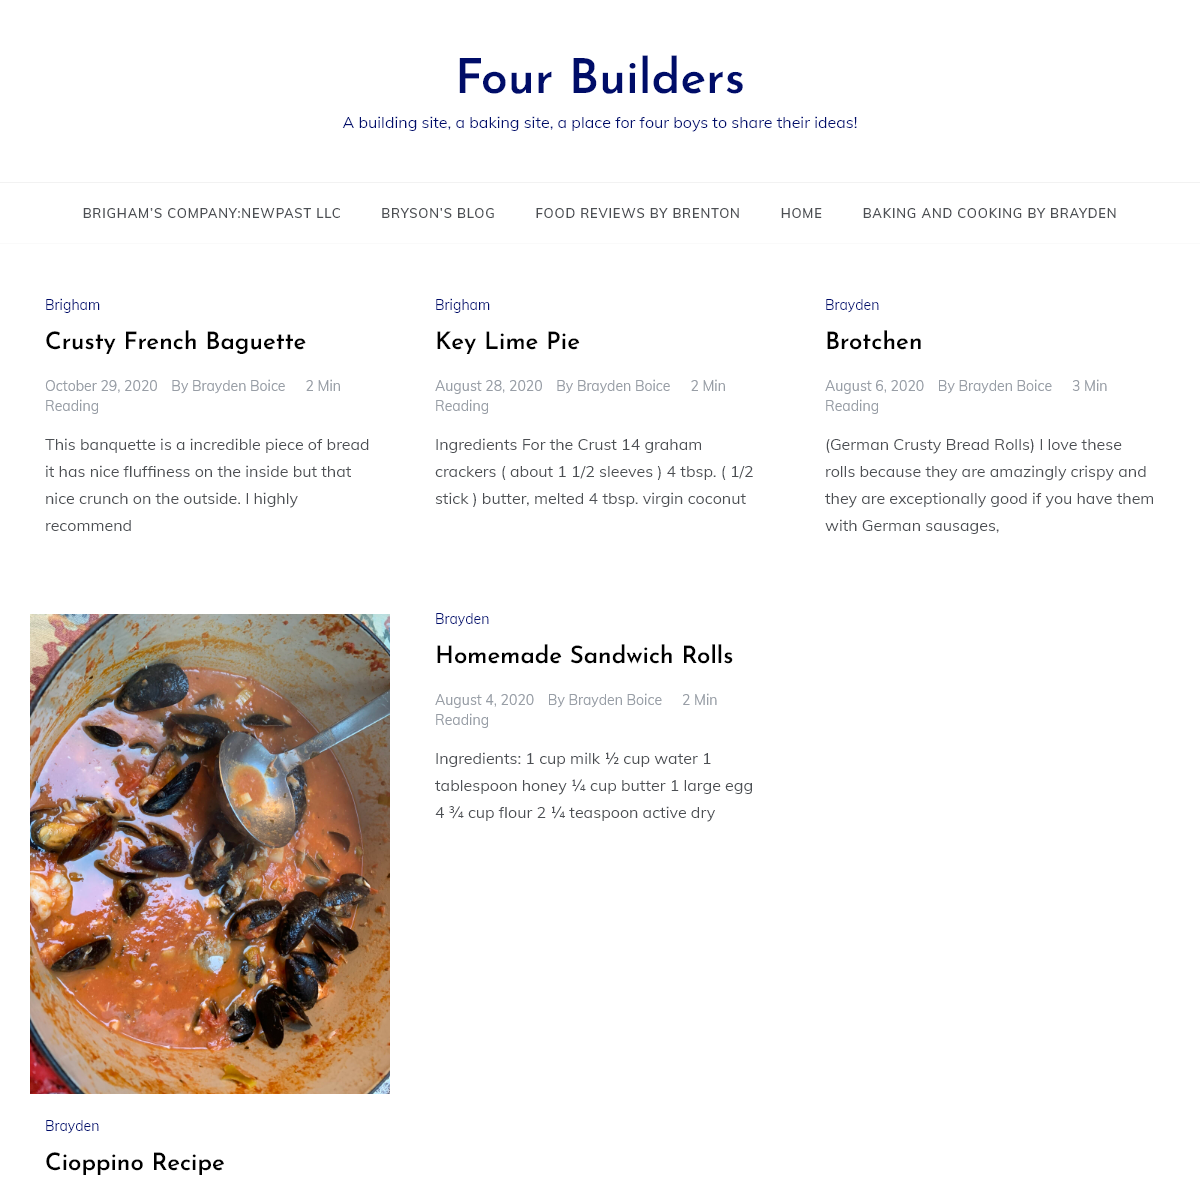 Four Builders â€“ A building site, a baking site, a place for four boys to share their ideas!